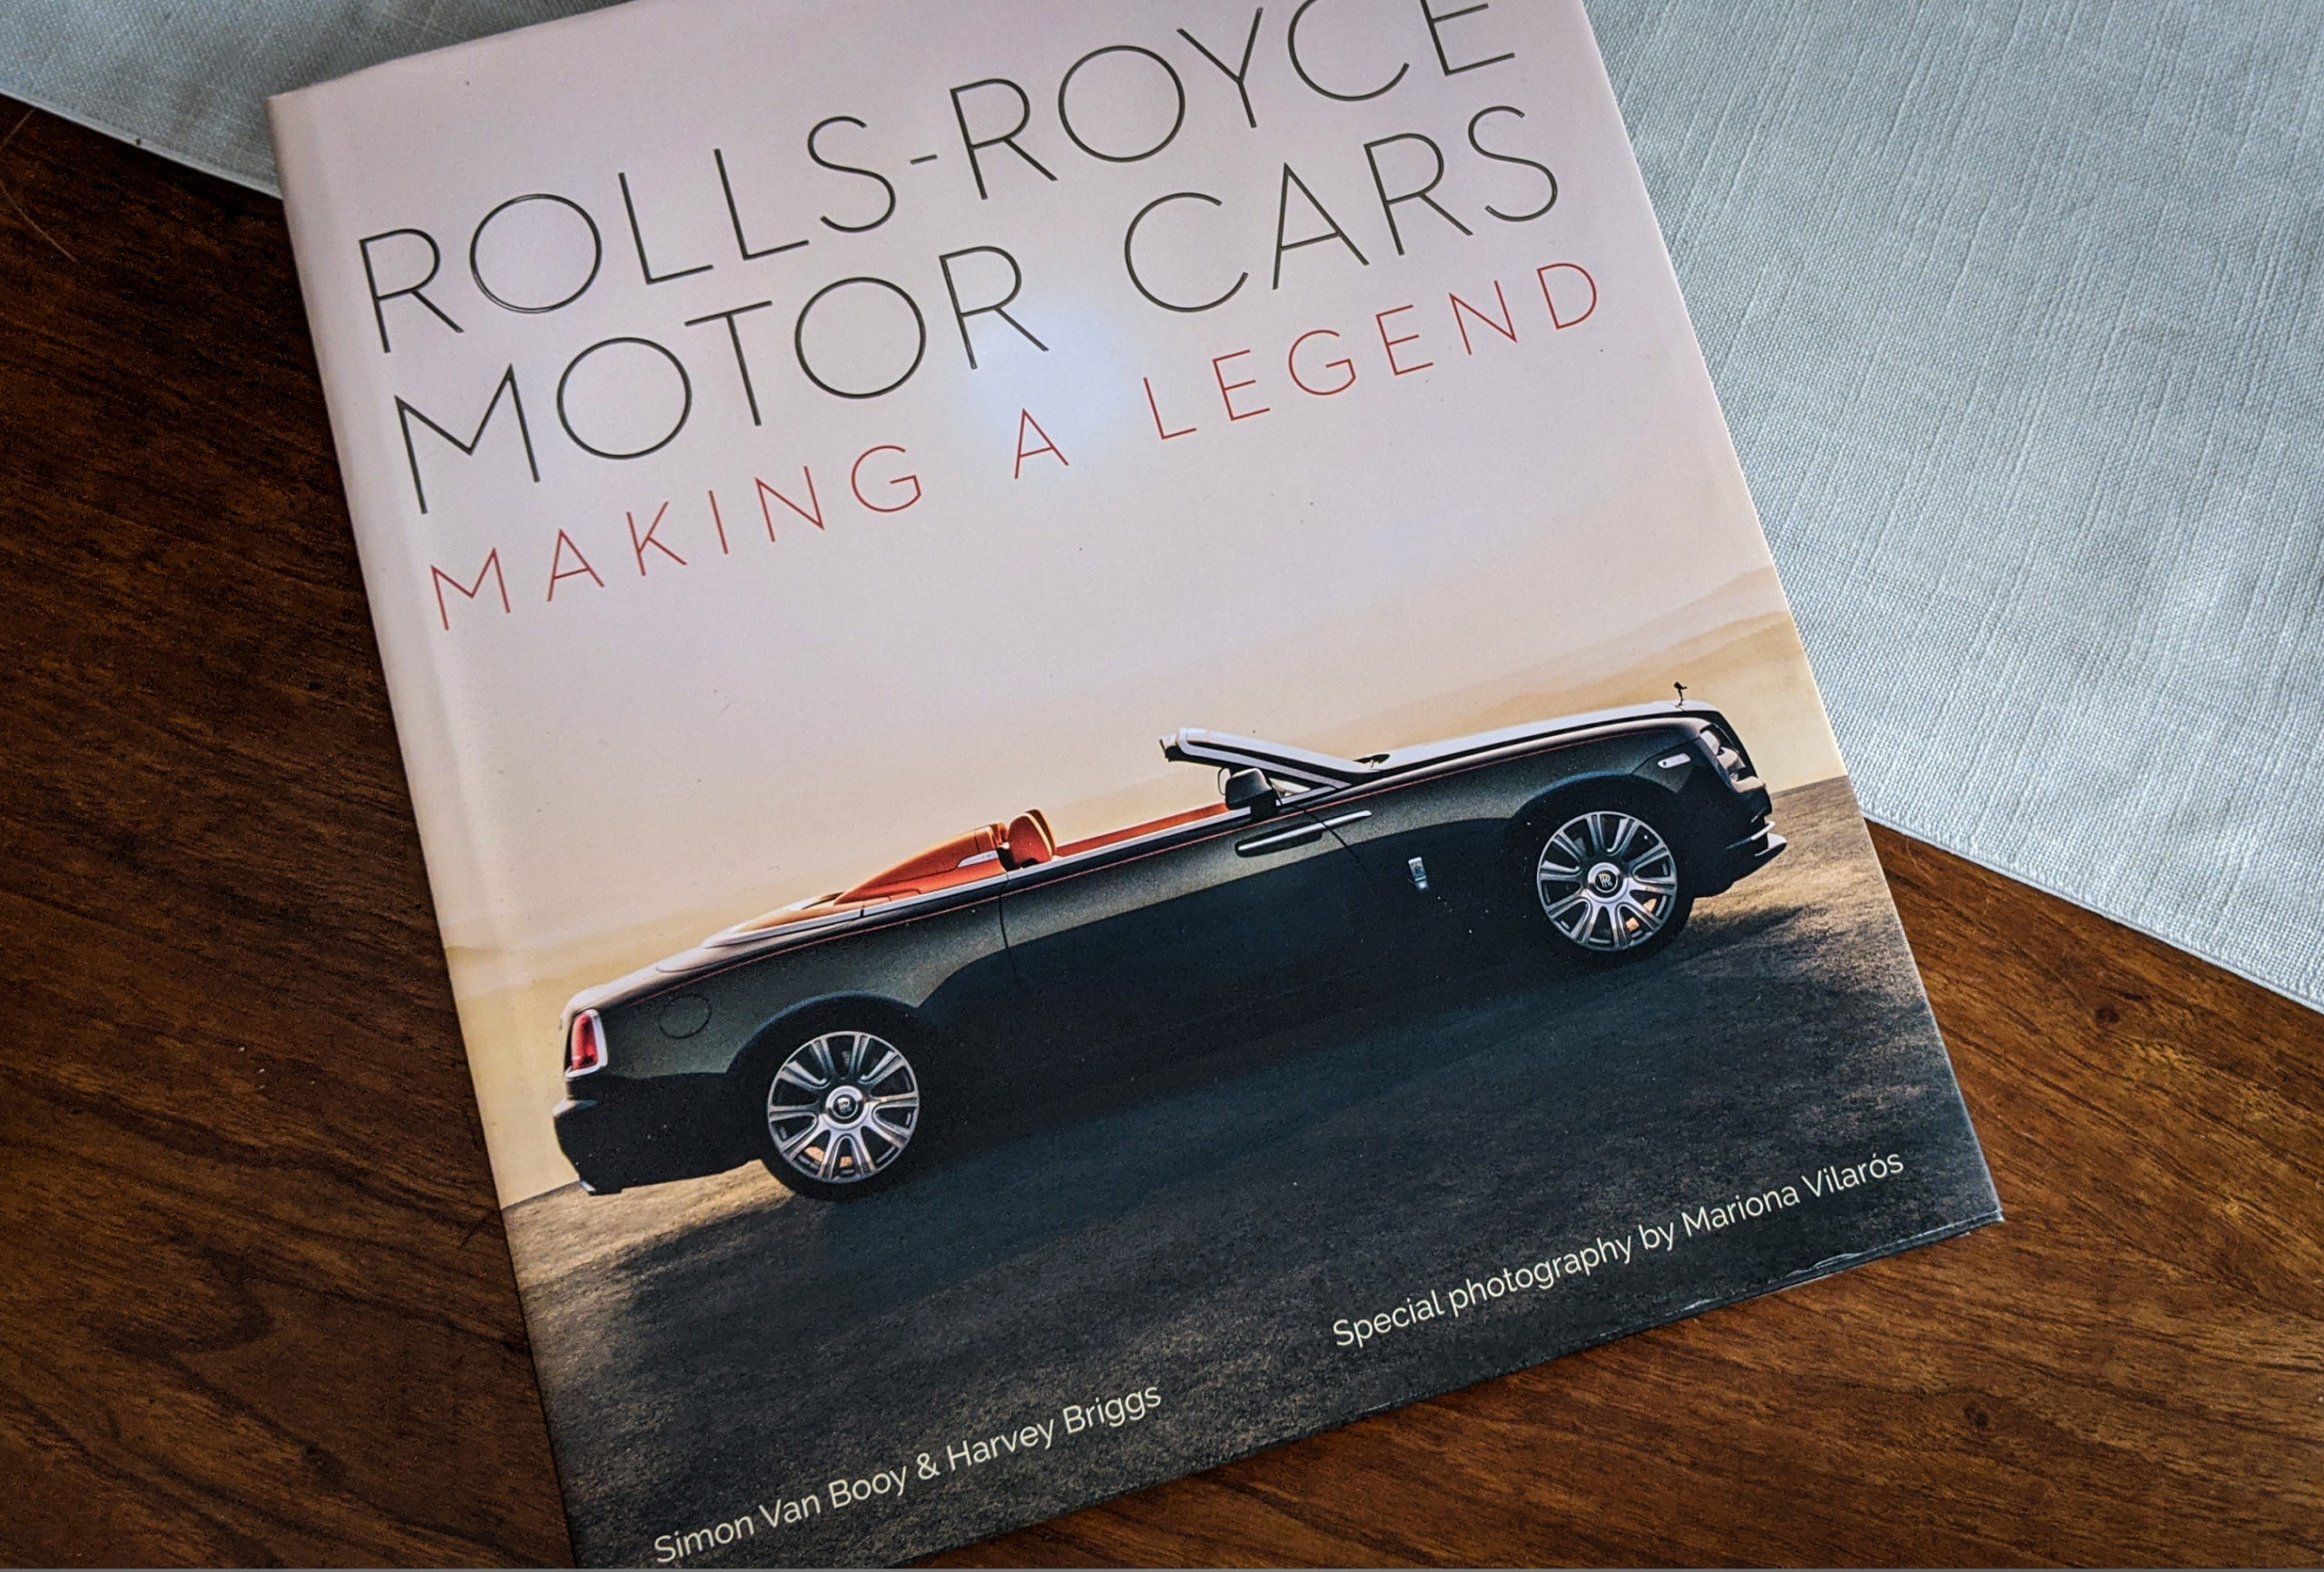 Making A Book, A Behind The Scenes Look At Rolls-Royce Motor Cars